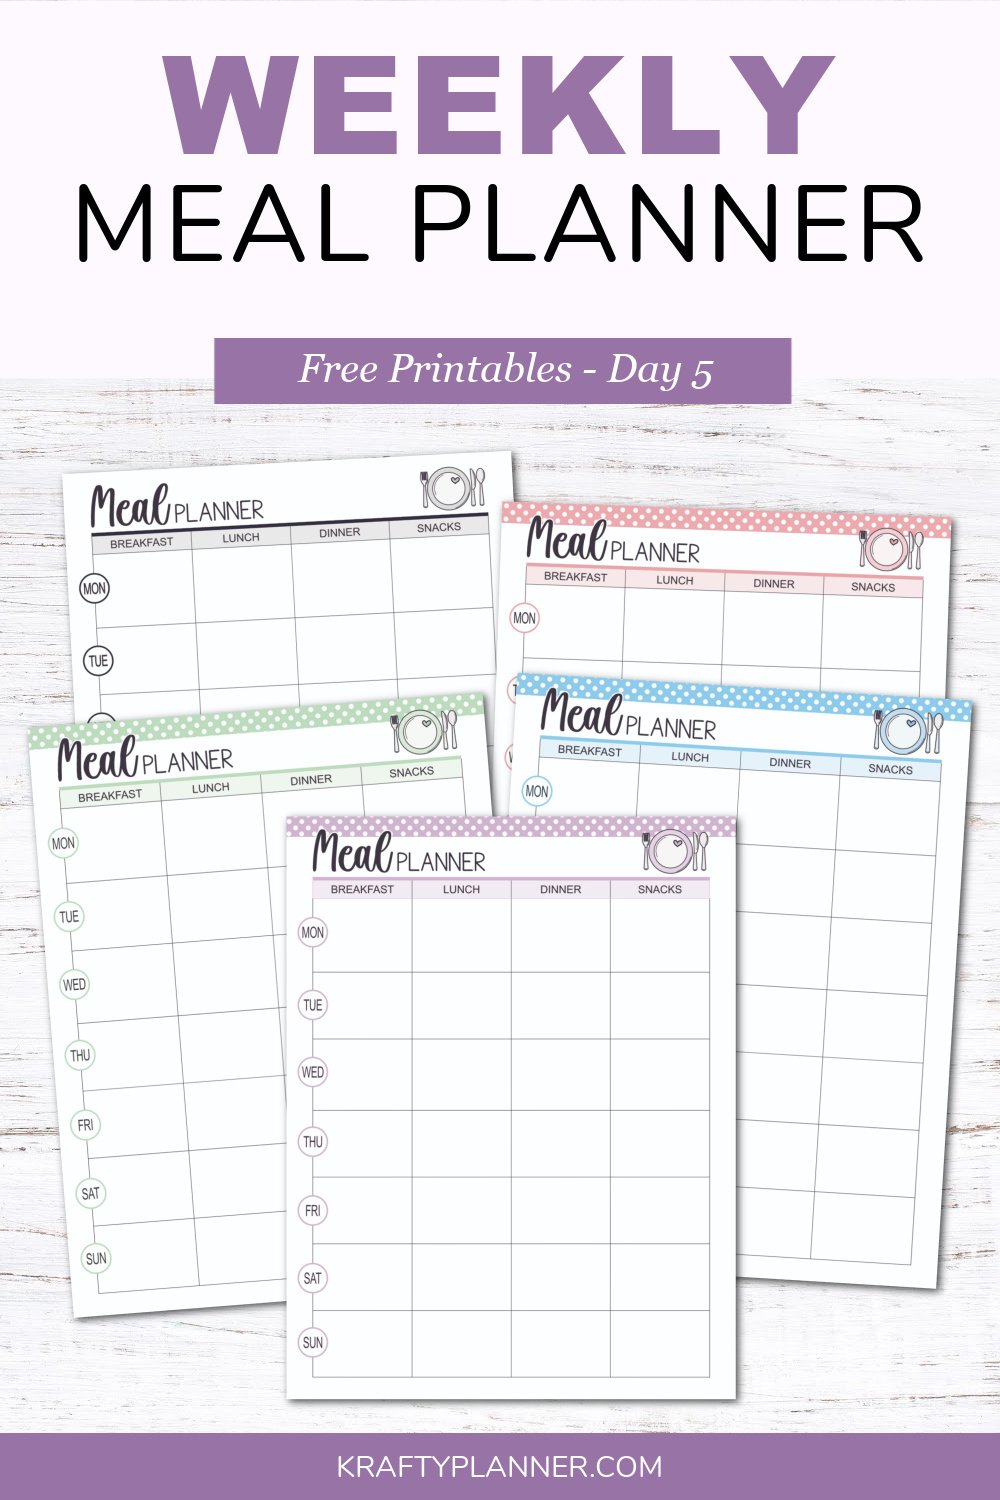 Weekly Meal Planner - Free Printable (Day 5)